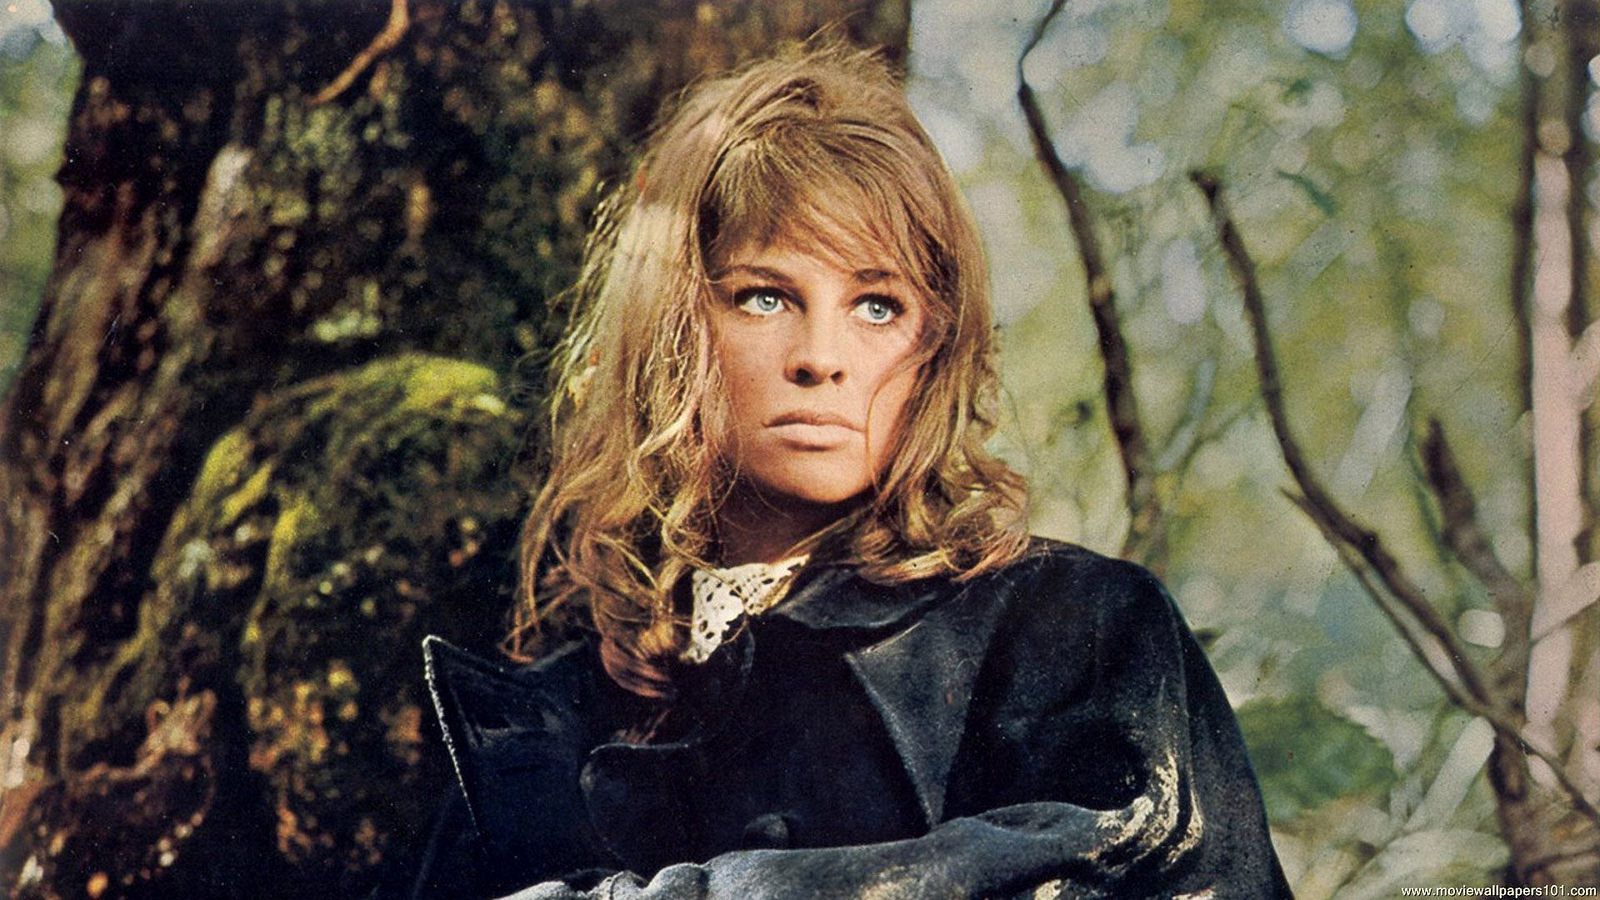 Far From The Madding Crowd Movie HD Wallpaper HD Wallpaper. Julie christie, The fall movie, Madding crowd